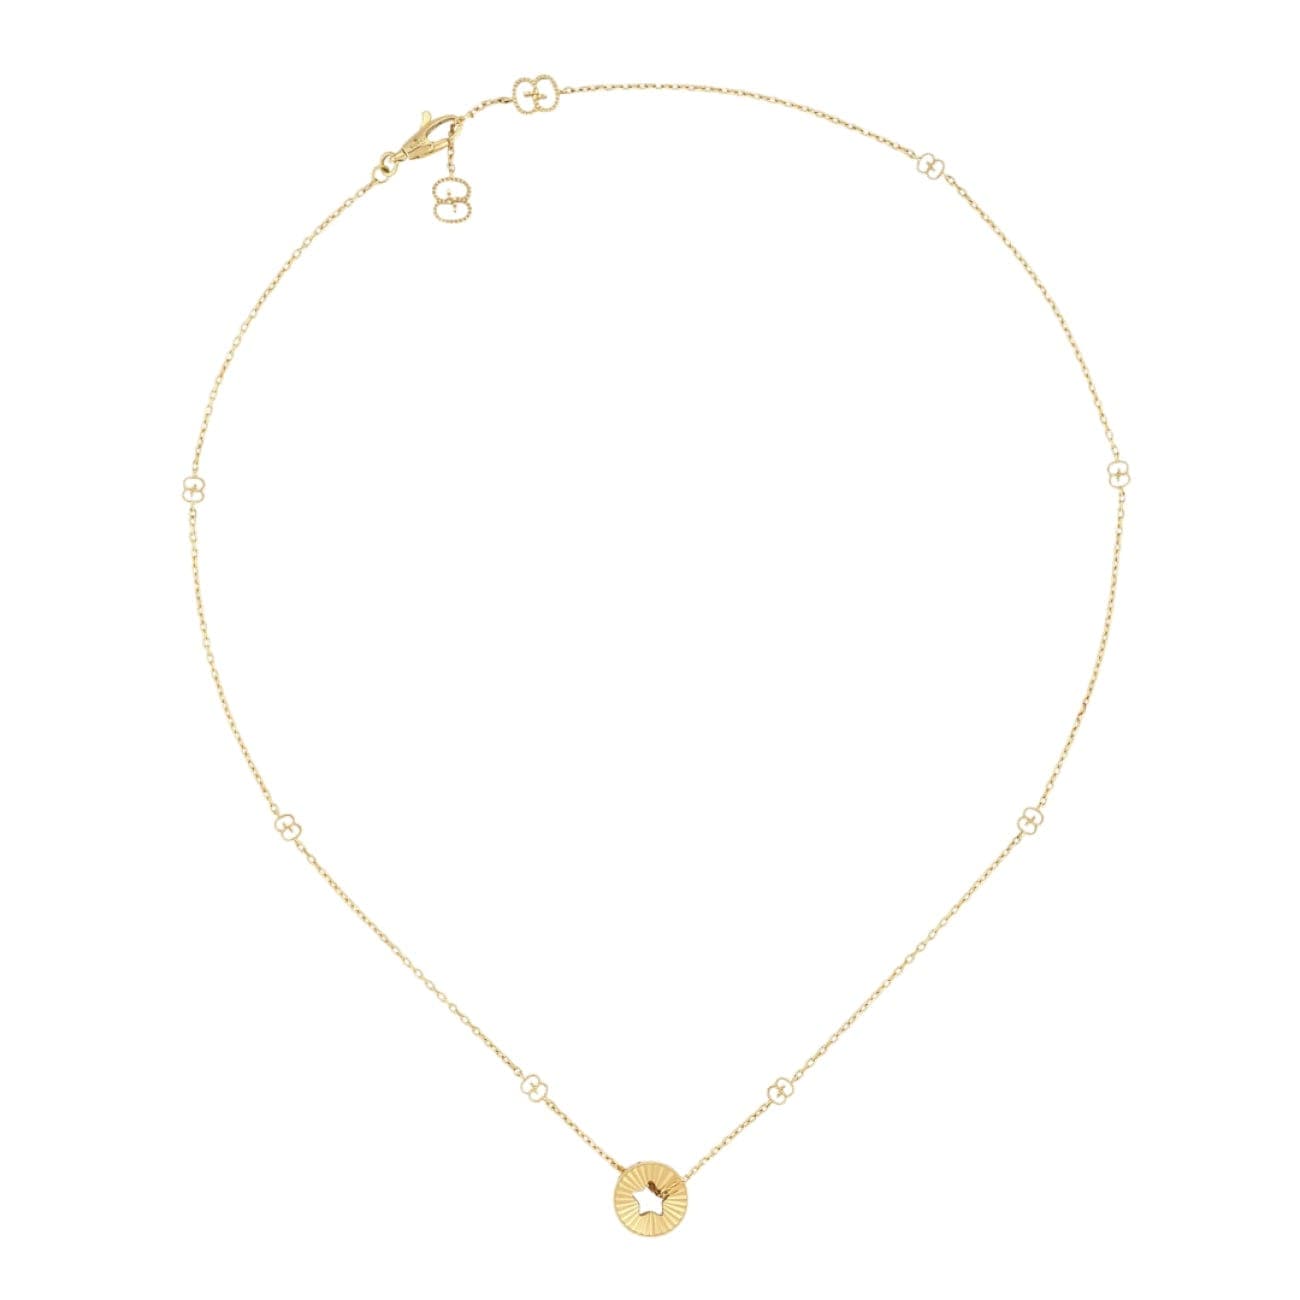 Cartier Love 18K Yellow Gold Pendant Necklace – My blog